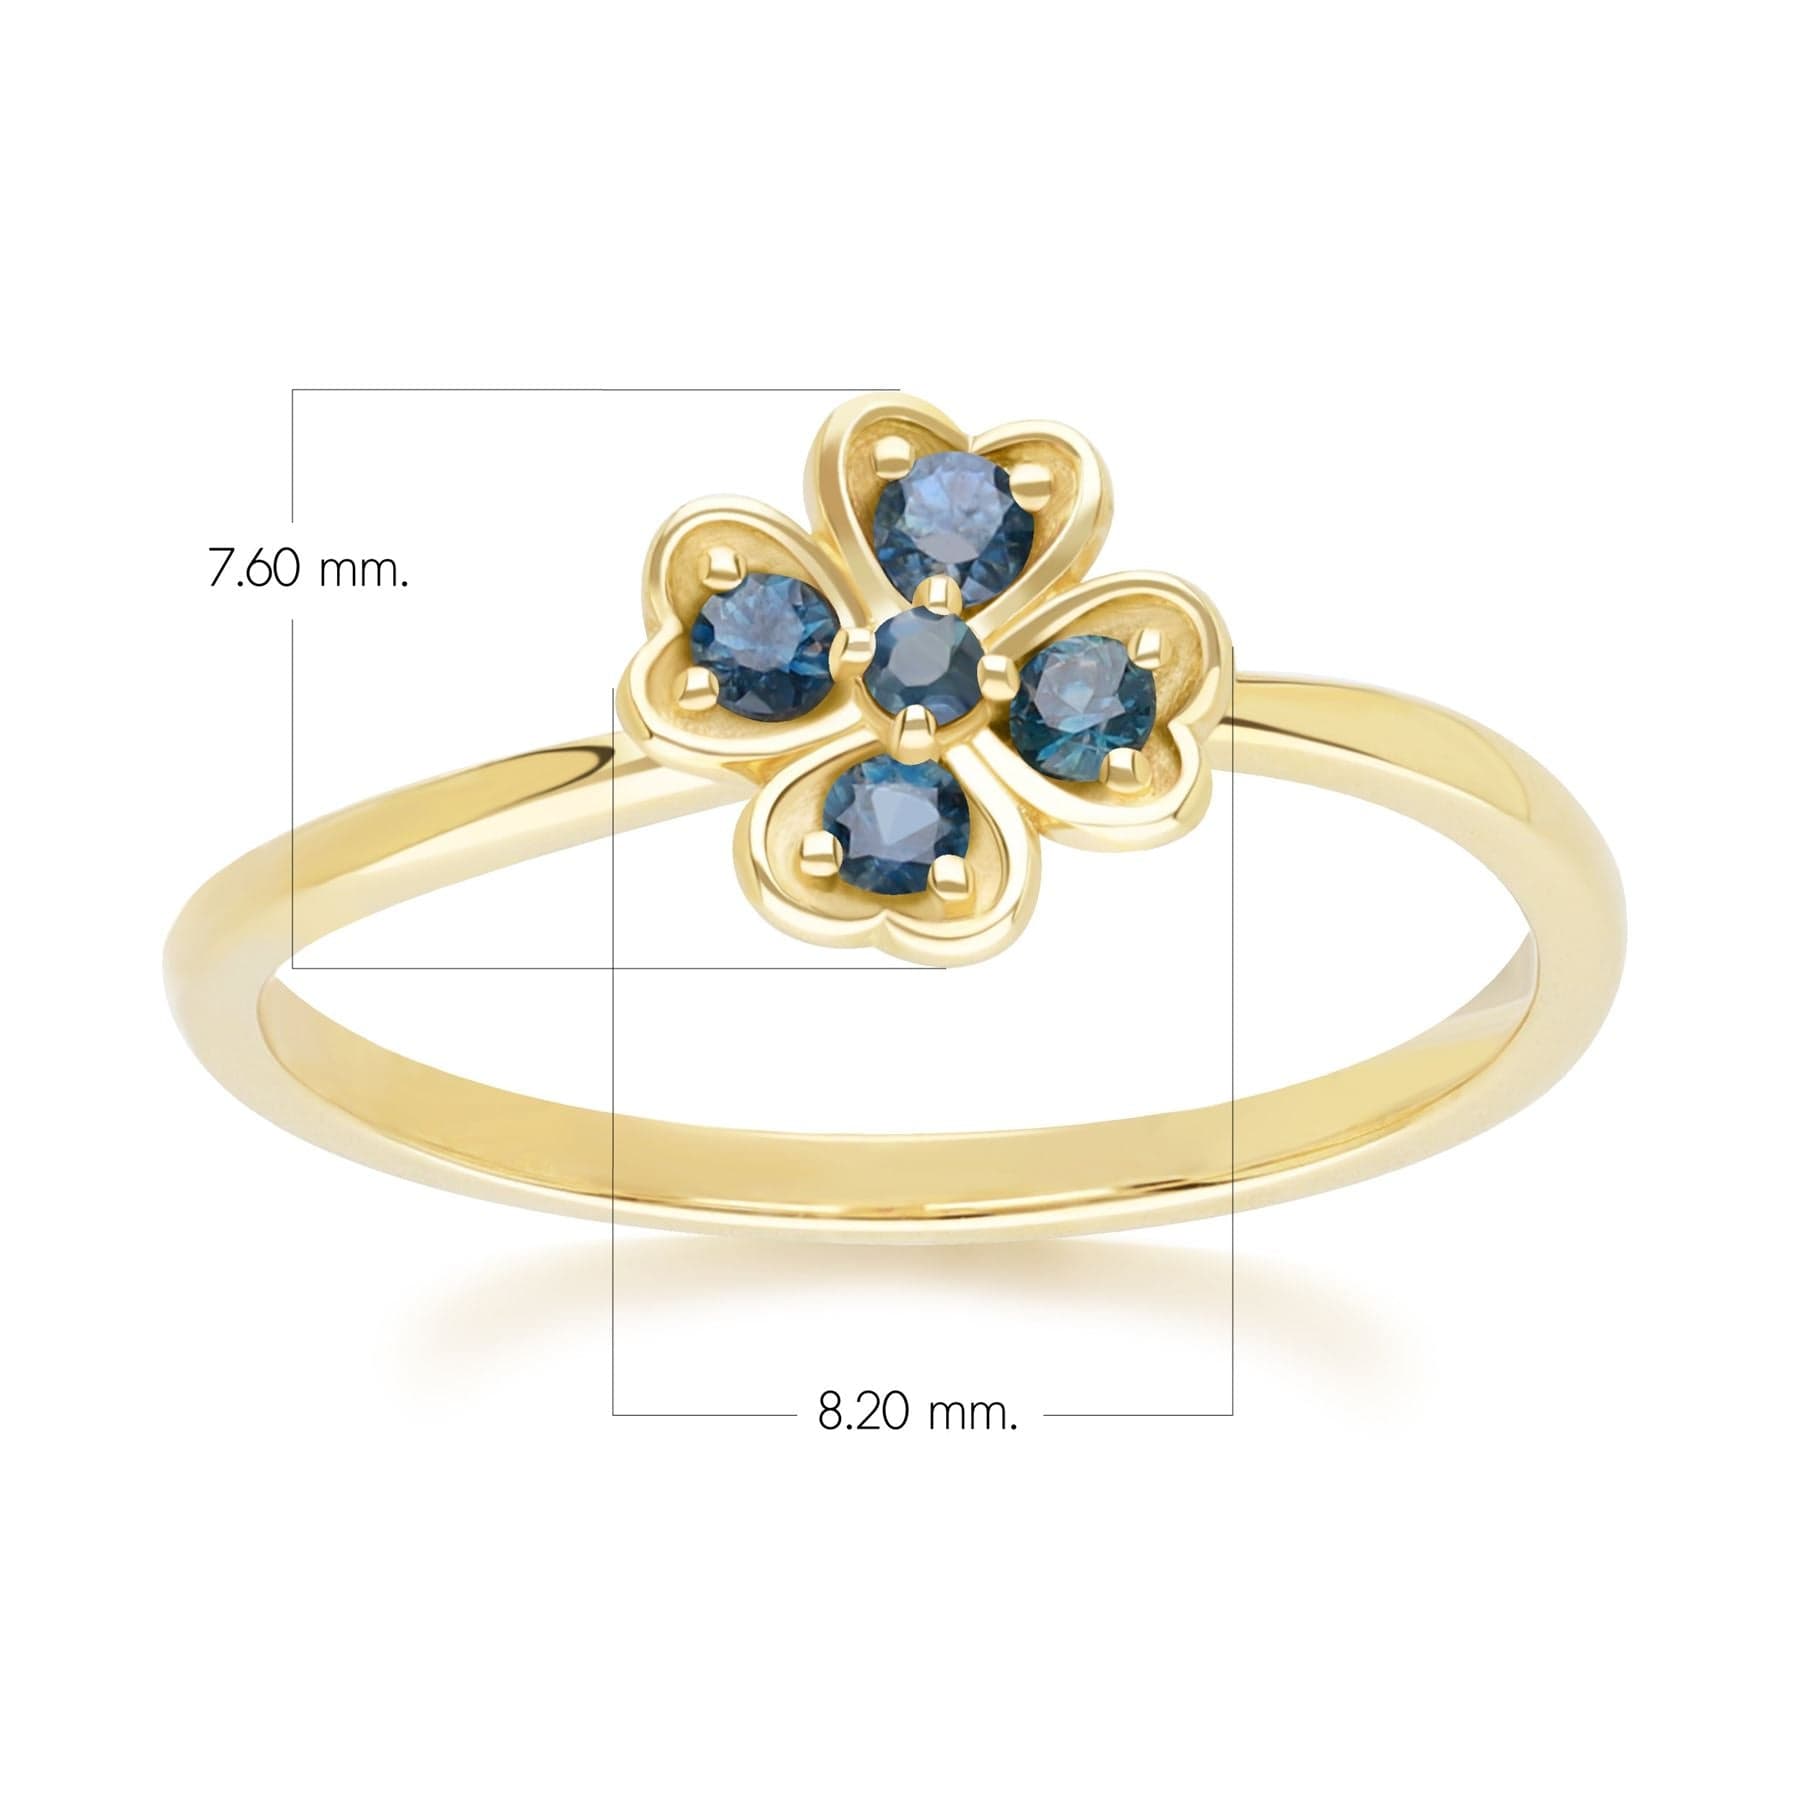 135R2102039 Gardenia Round Sapphire Clover Ring in 9ct Yellow Gold Dimensions